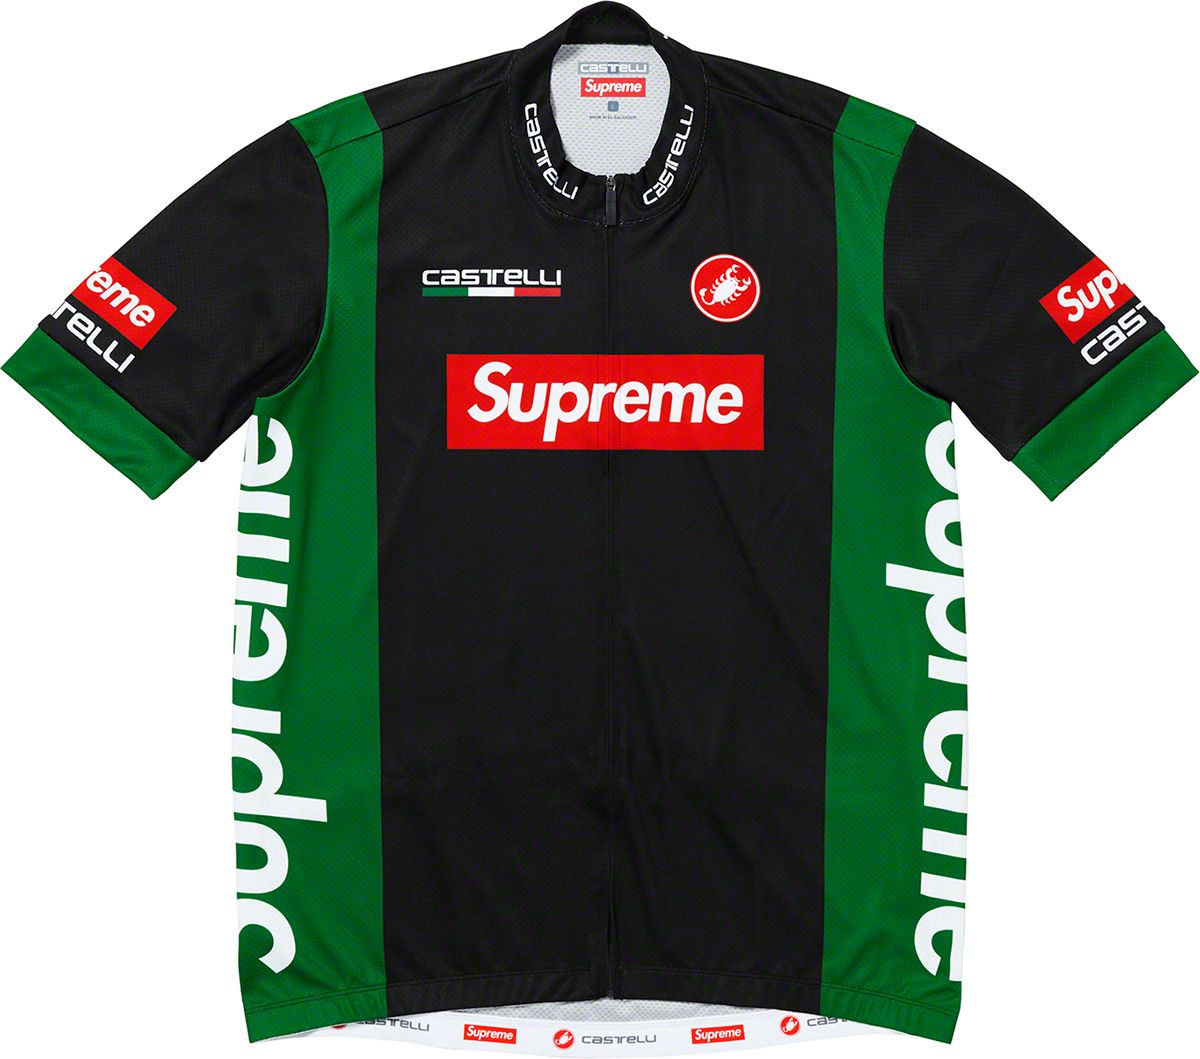 Supreme®/Castelli Cycling Jersey - Spring/Summer 2019 Preview